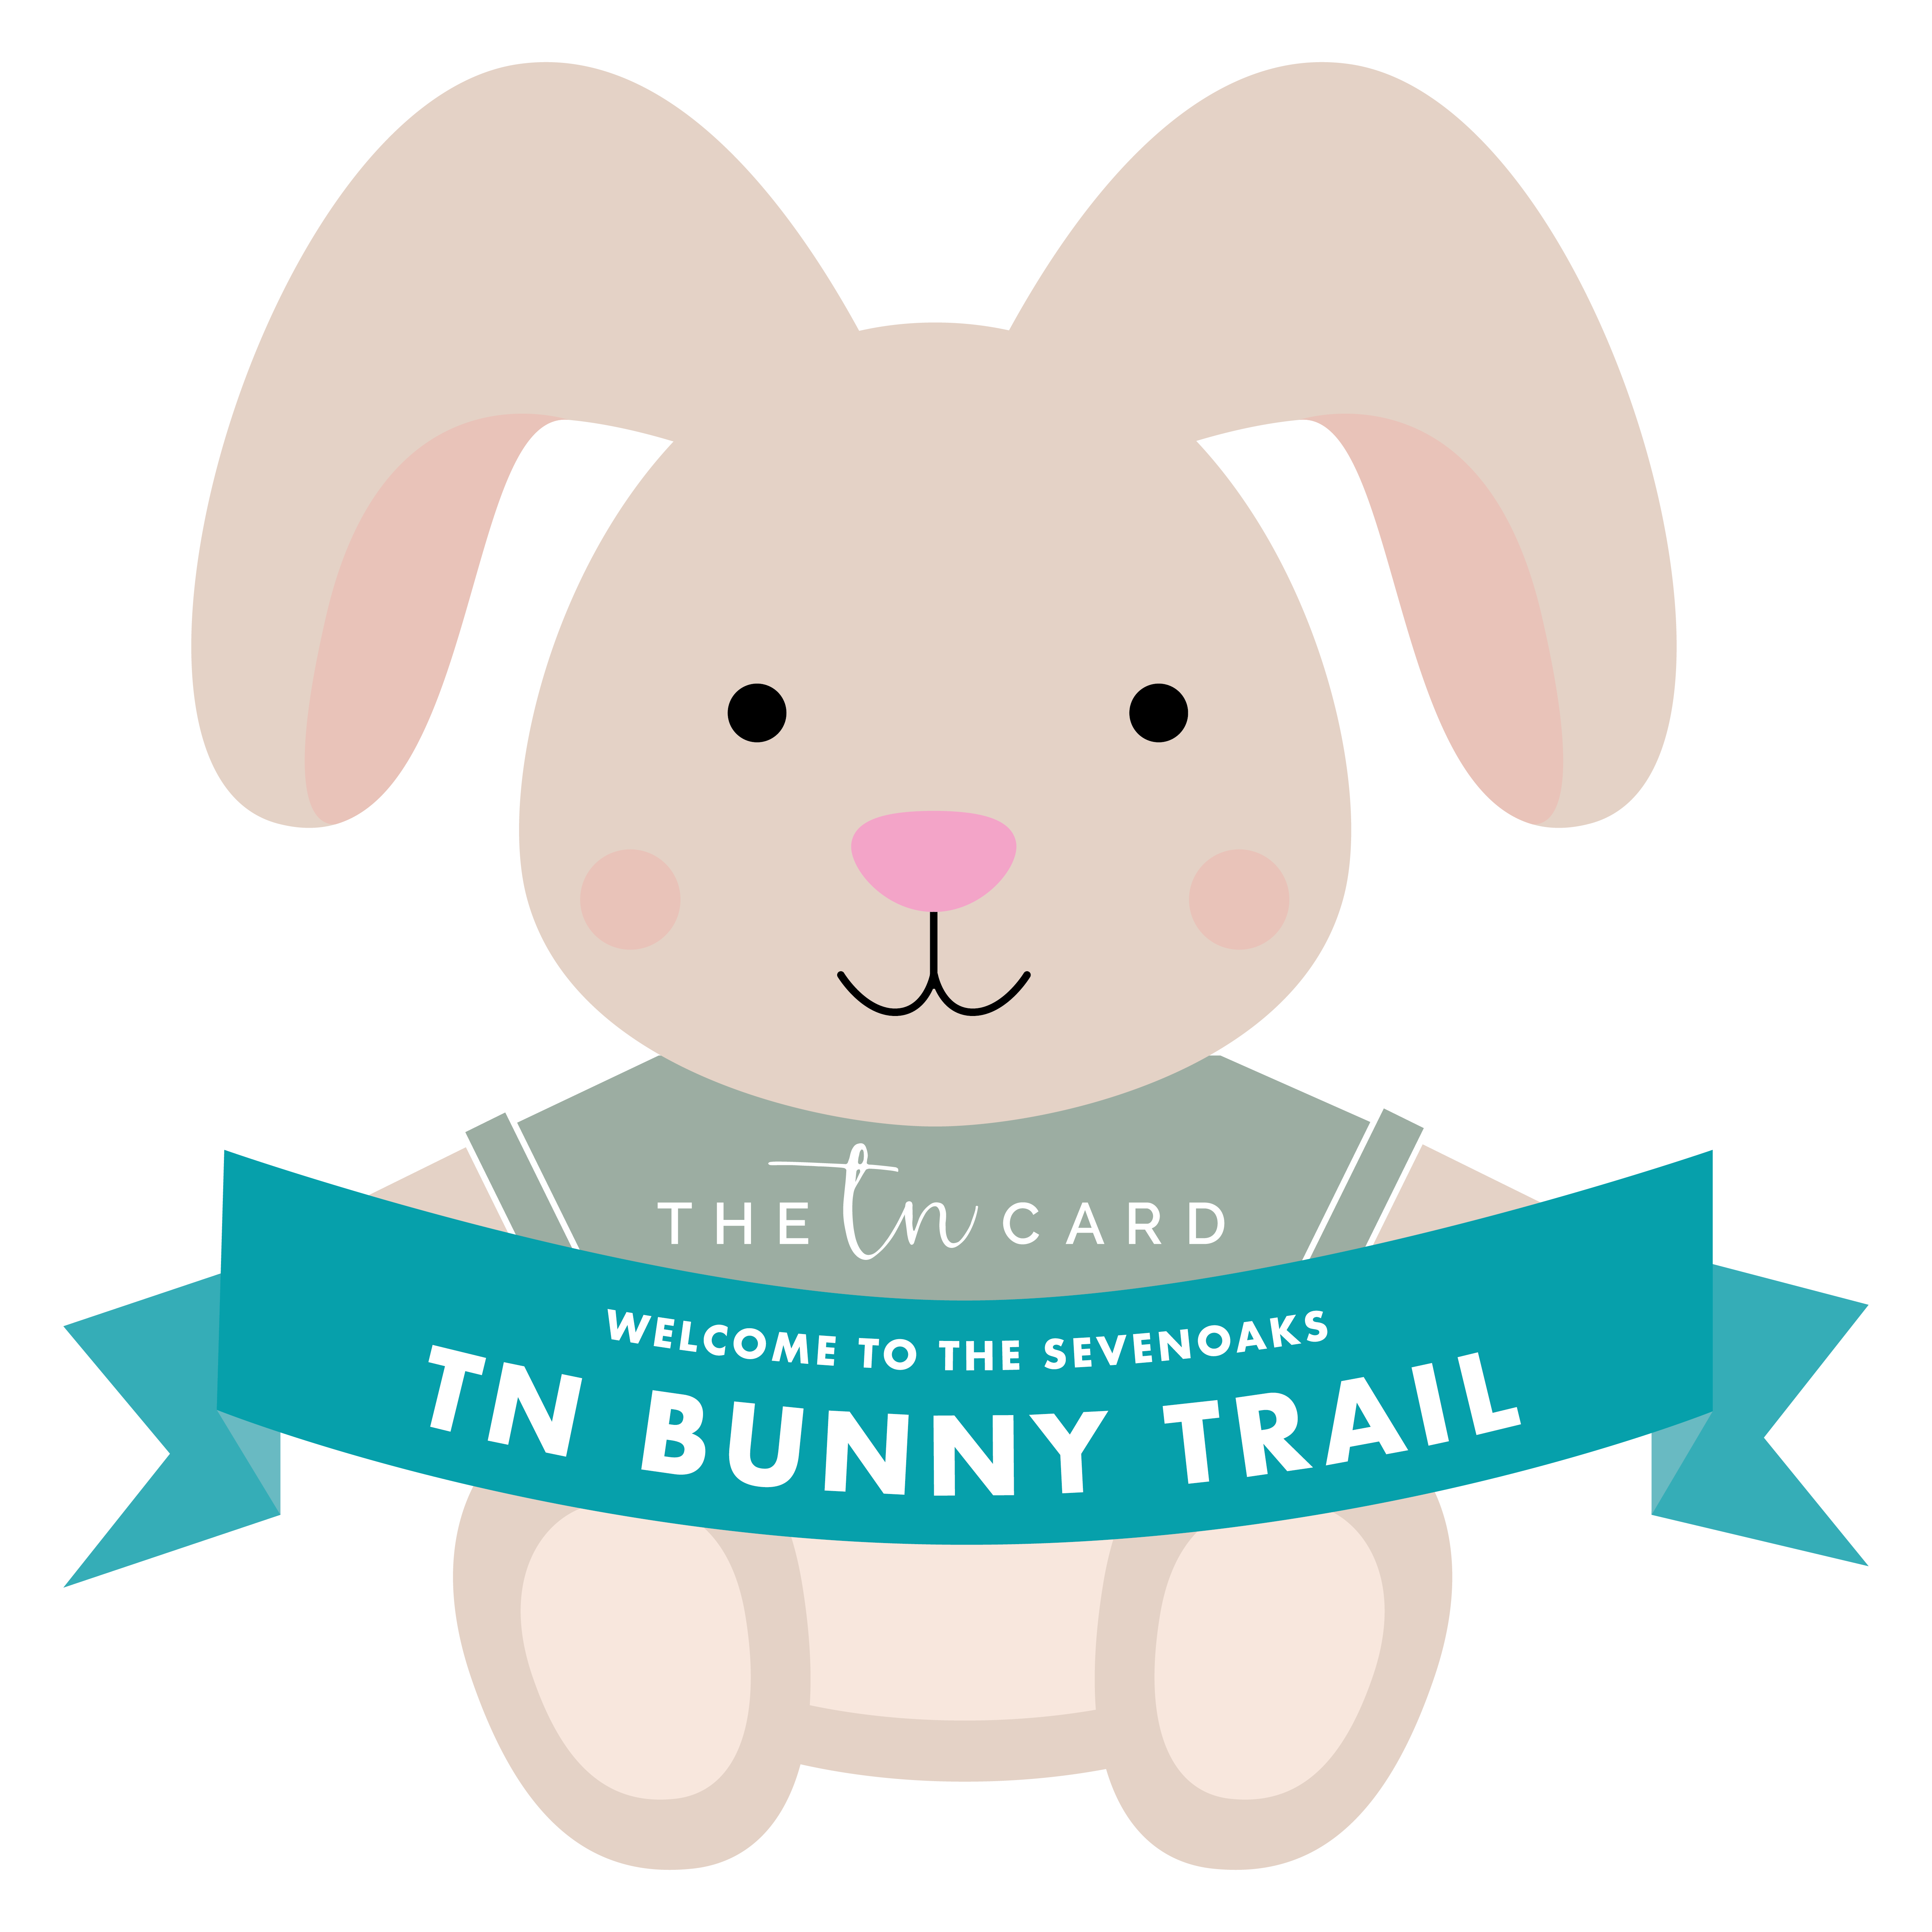 Featured image for “TN Bunny Trail”